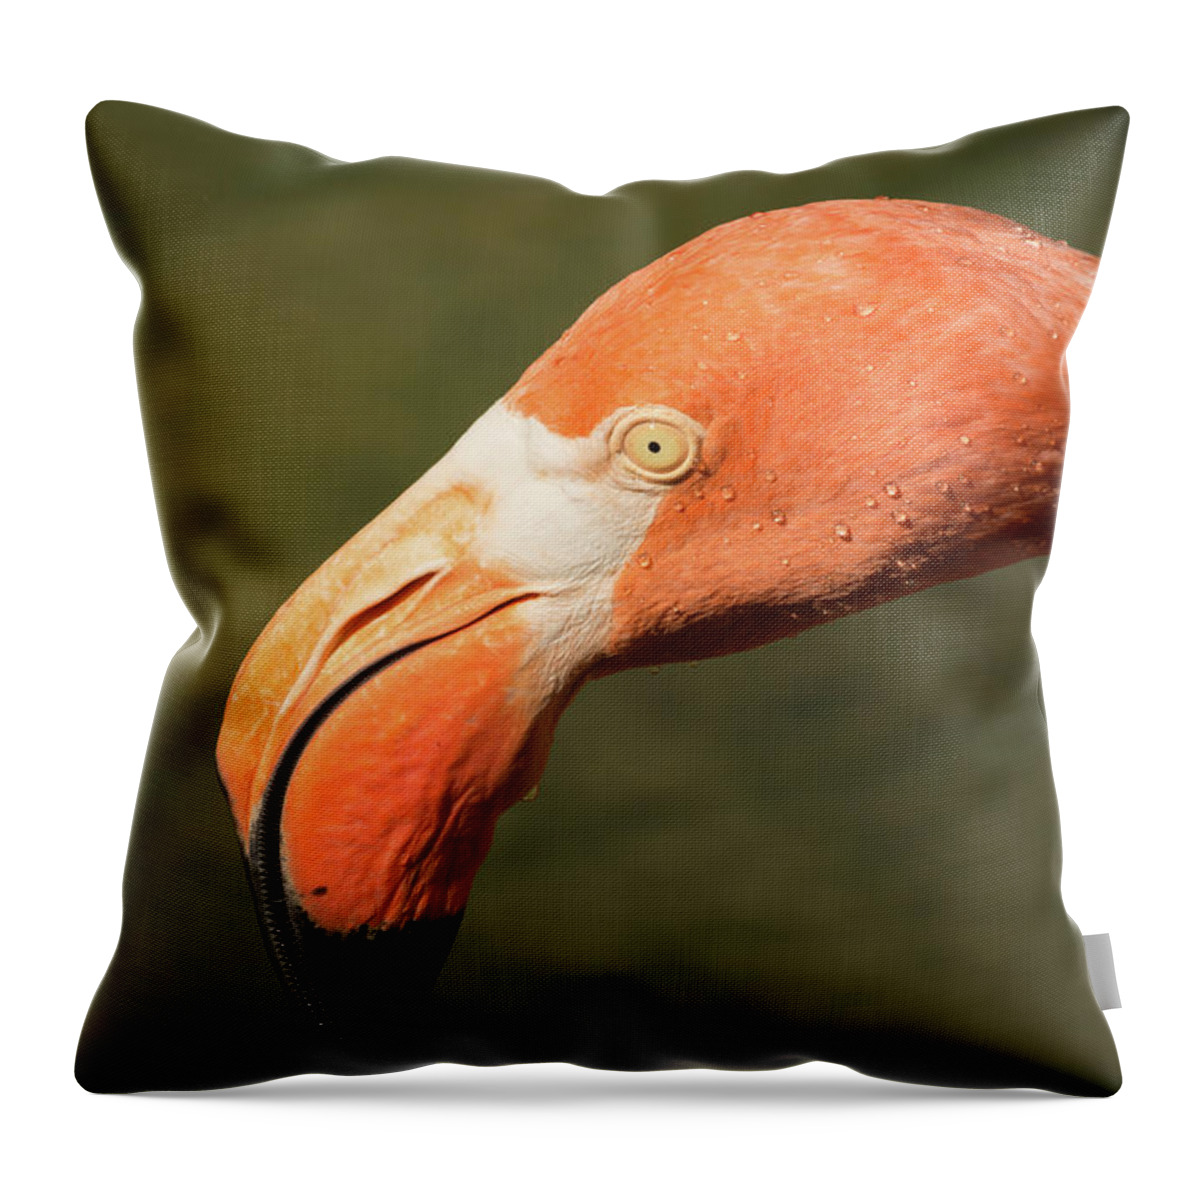 Zoo Throw Pillow featuring the photograph Pink Flamingo by John Benedict